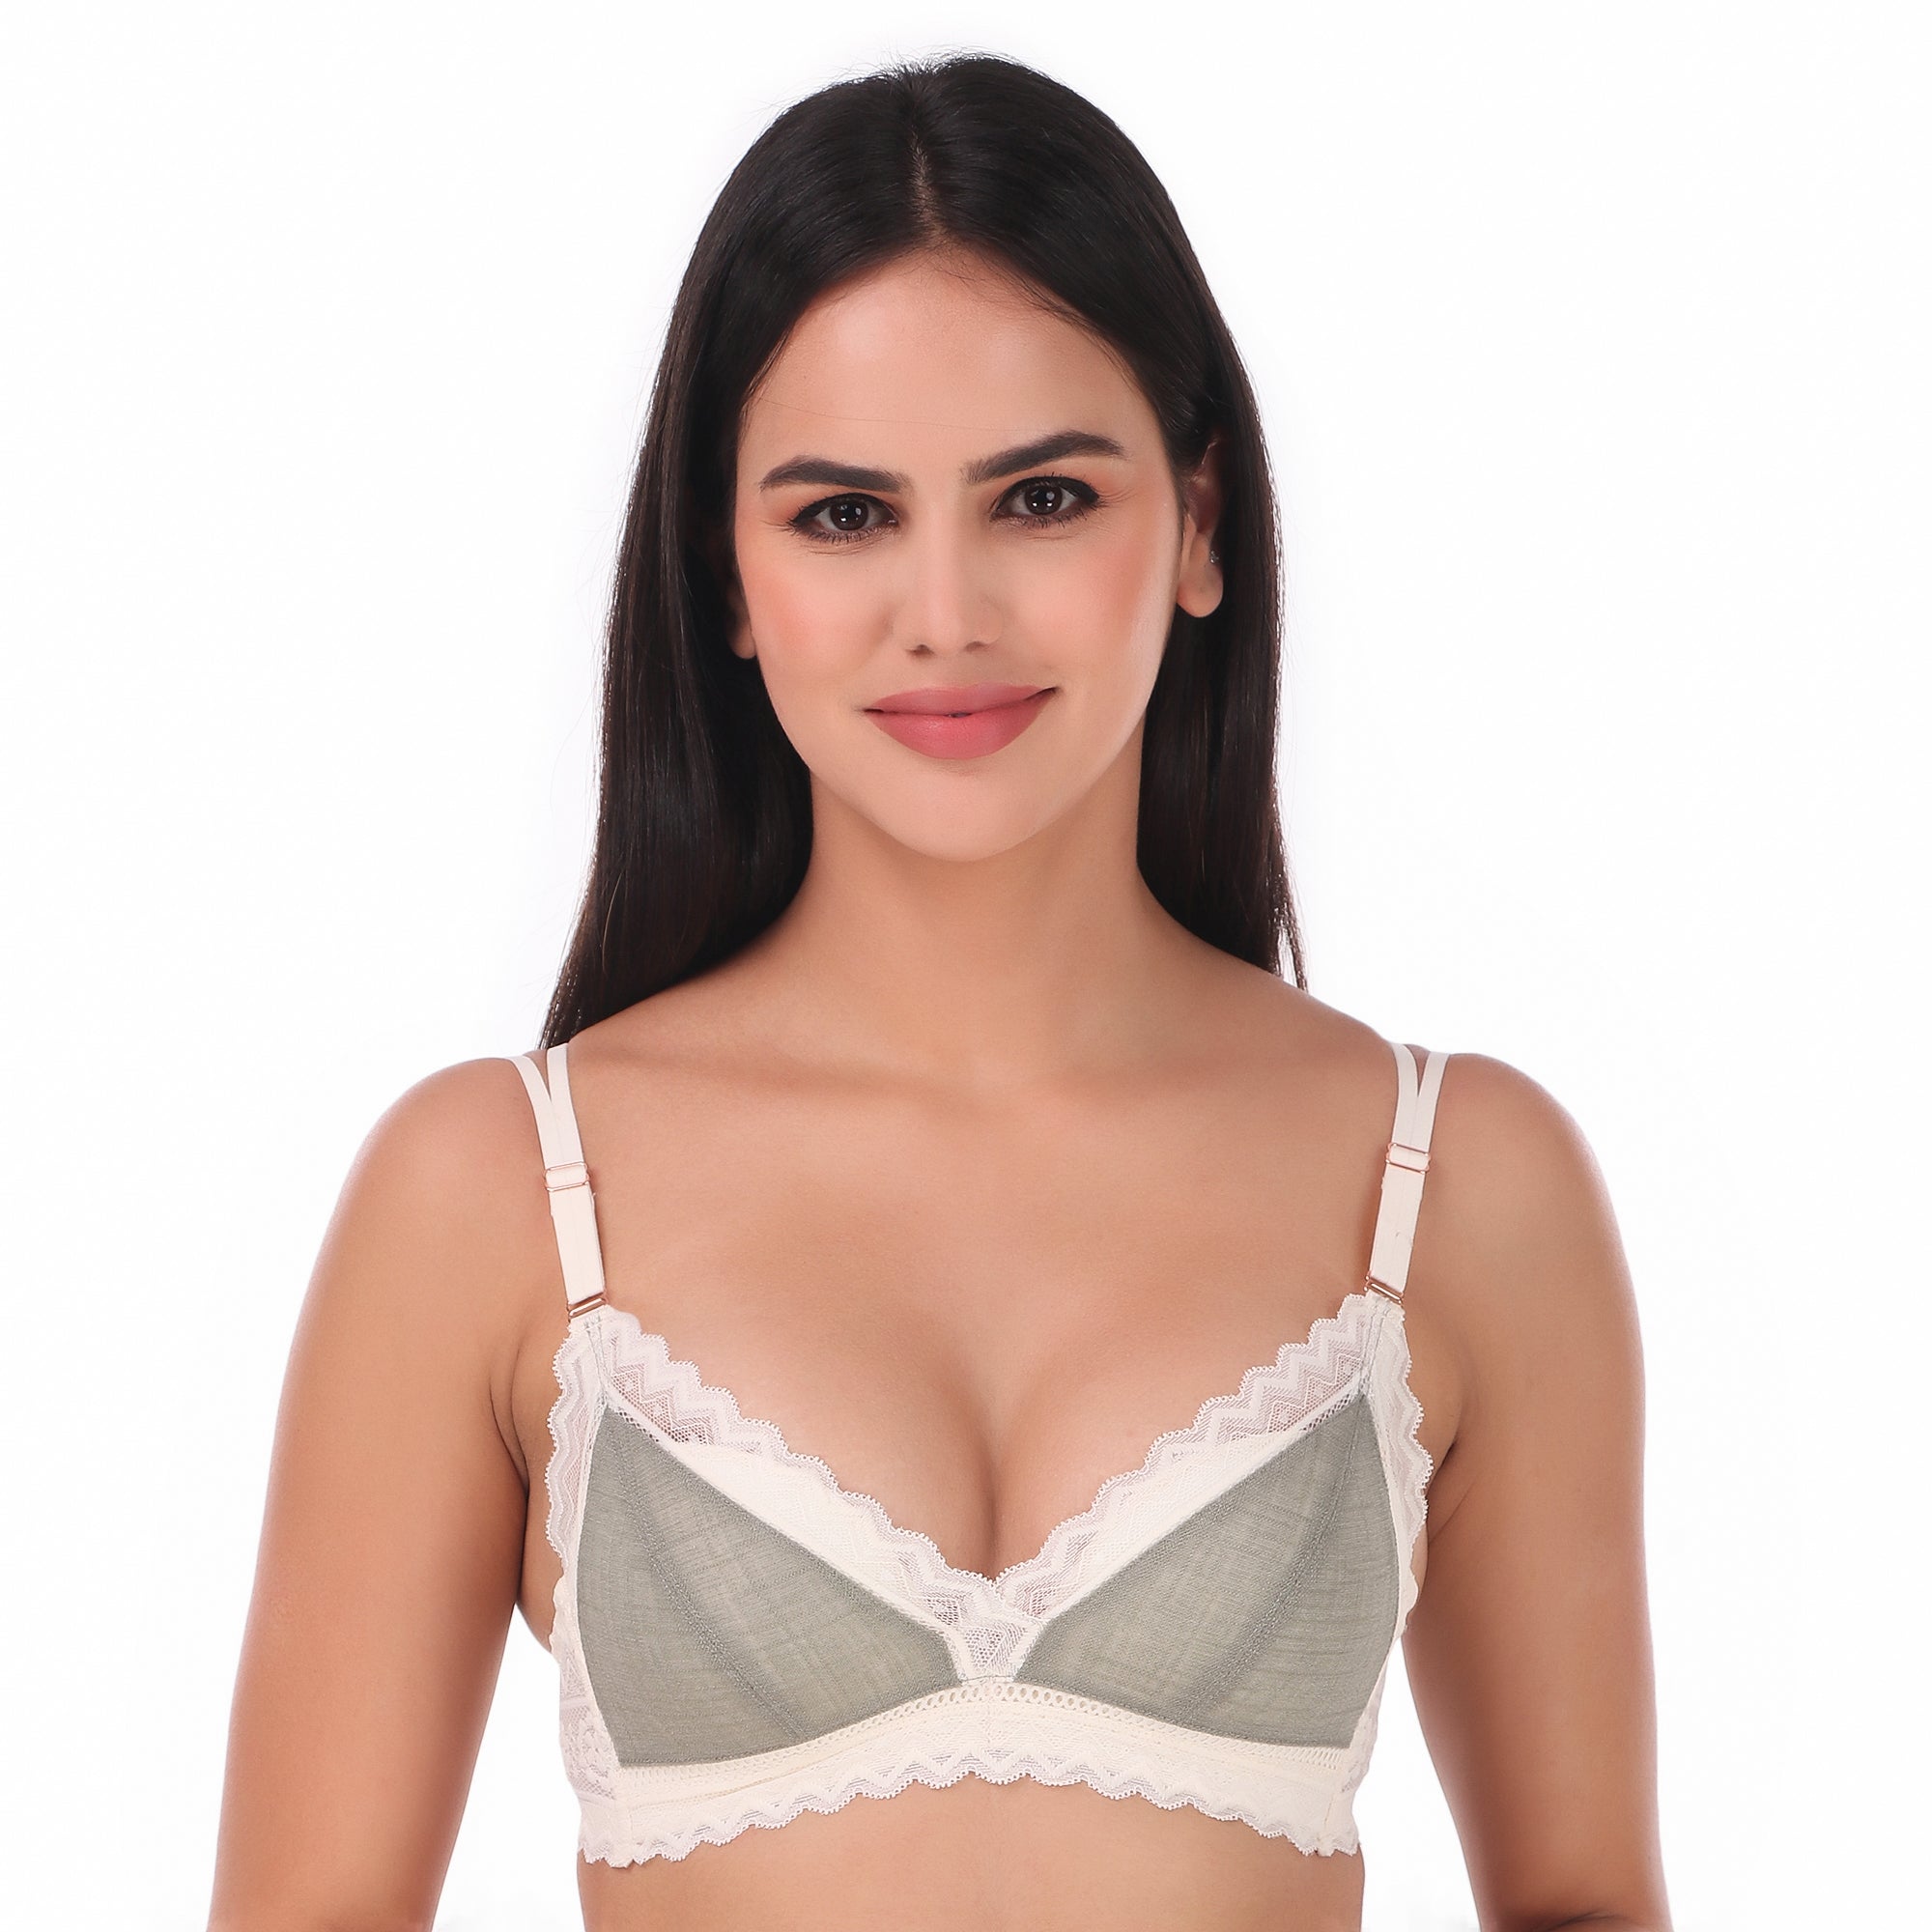 Trendy Fit Stretch Cotton Beginners Bra With Antimicrobial Finish